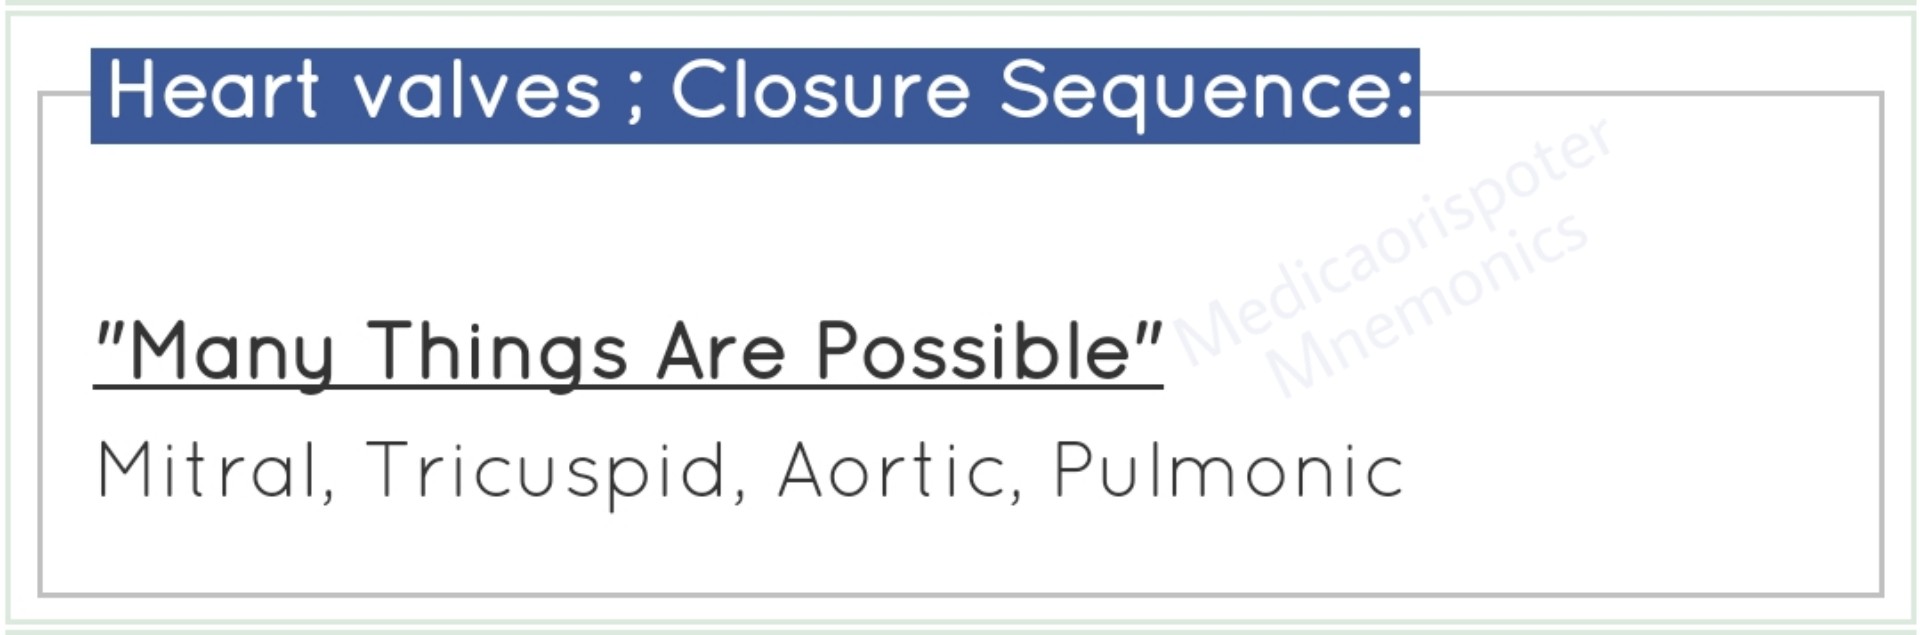 Heart Valves Closure Sequence